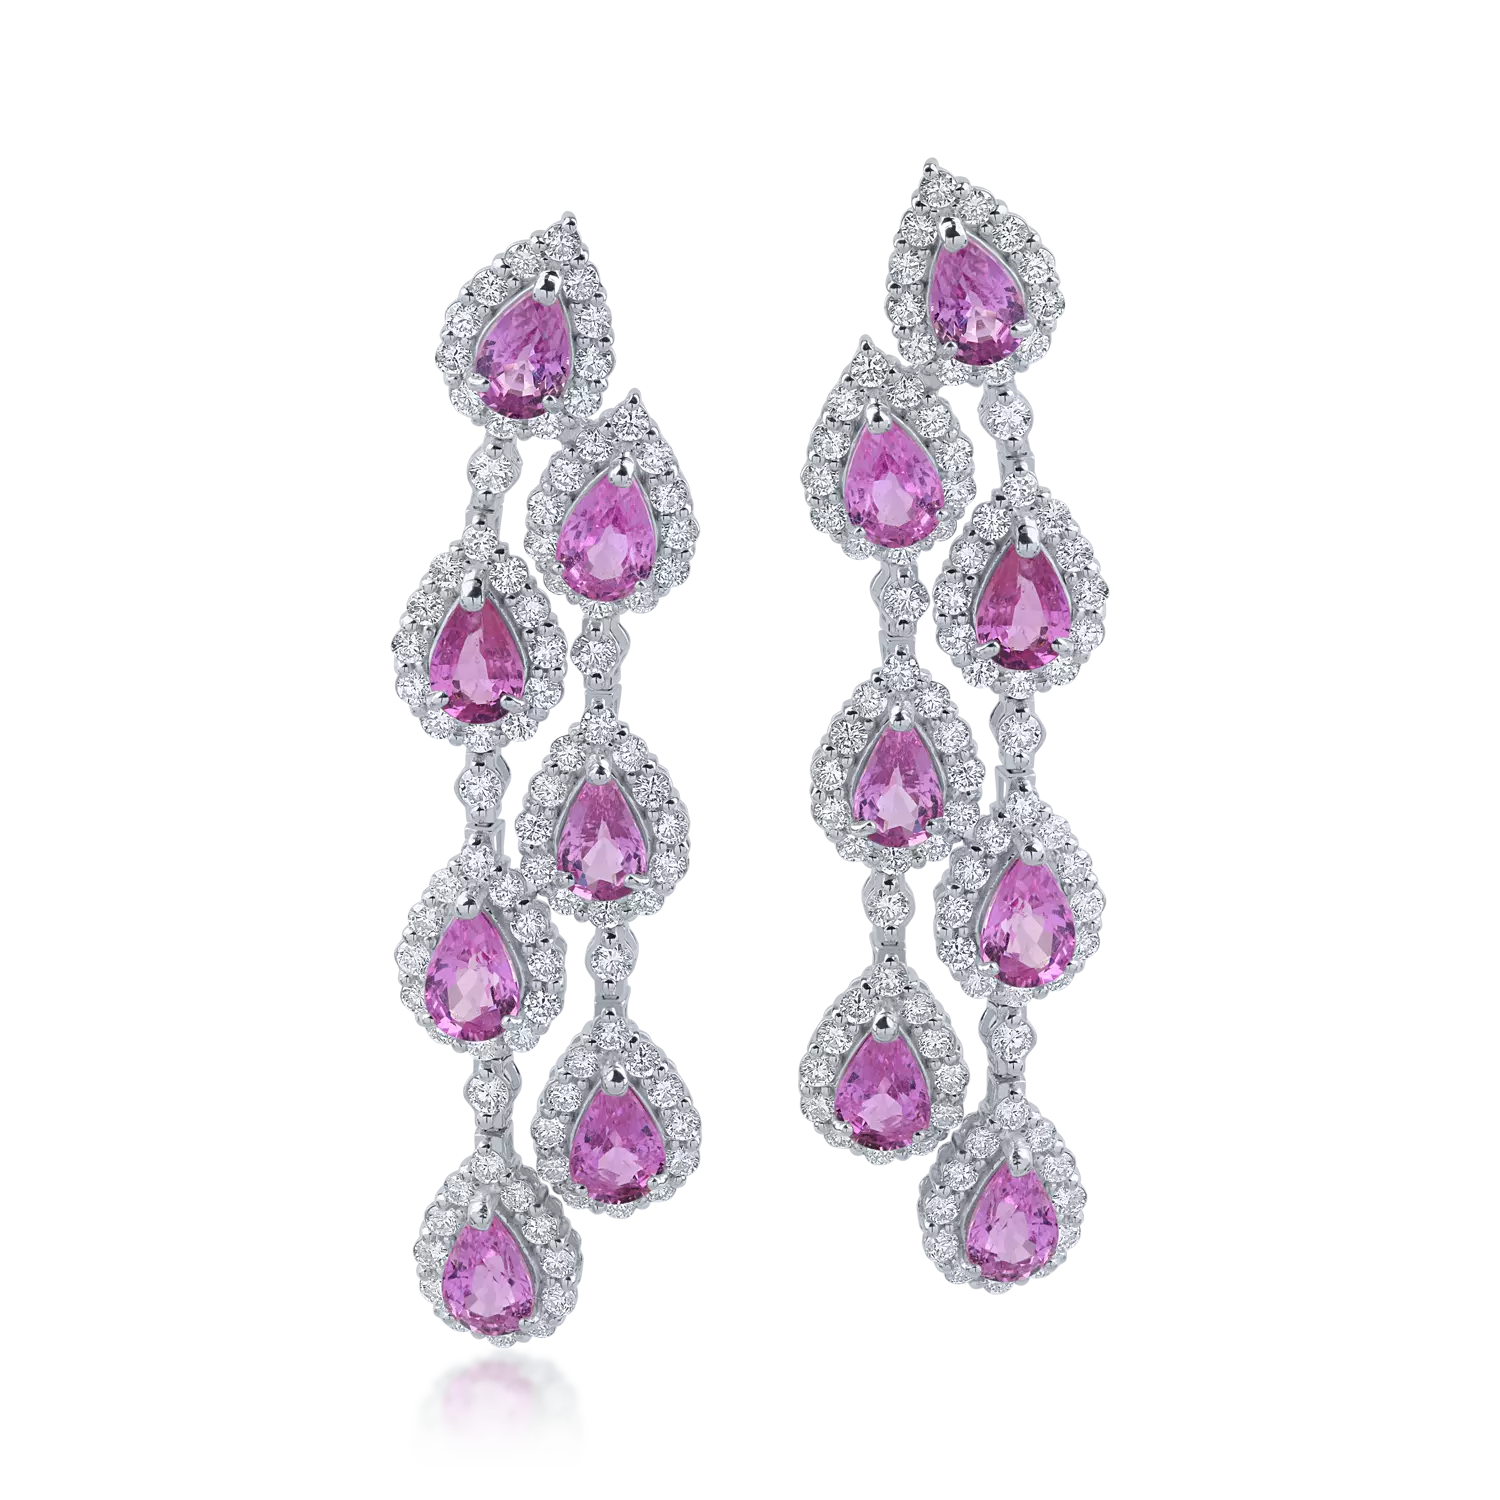 Platinum earrings with 7.35ct pink sapphires and 2.68ct diamonds